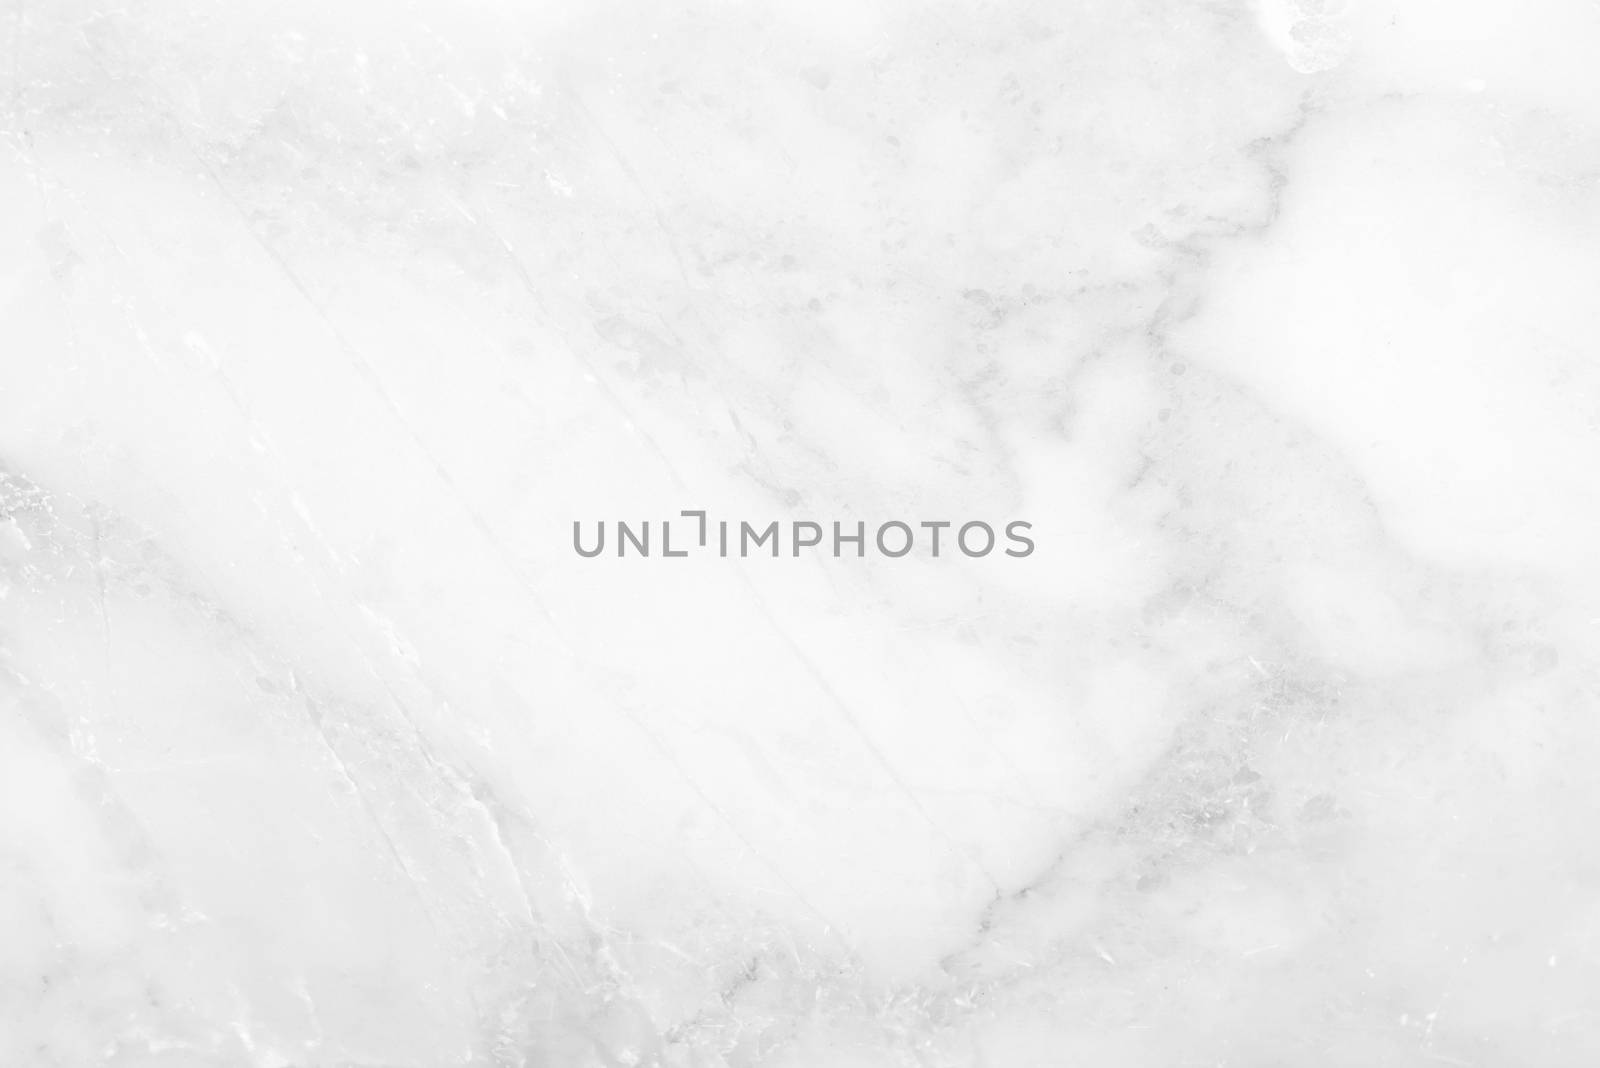 White Marble Background, Suitable for Presentation and Web Templates.